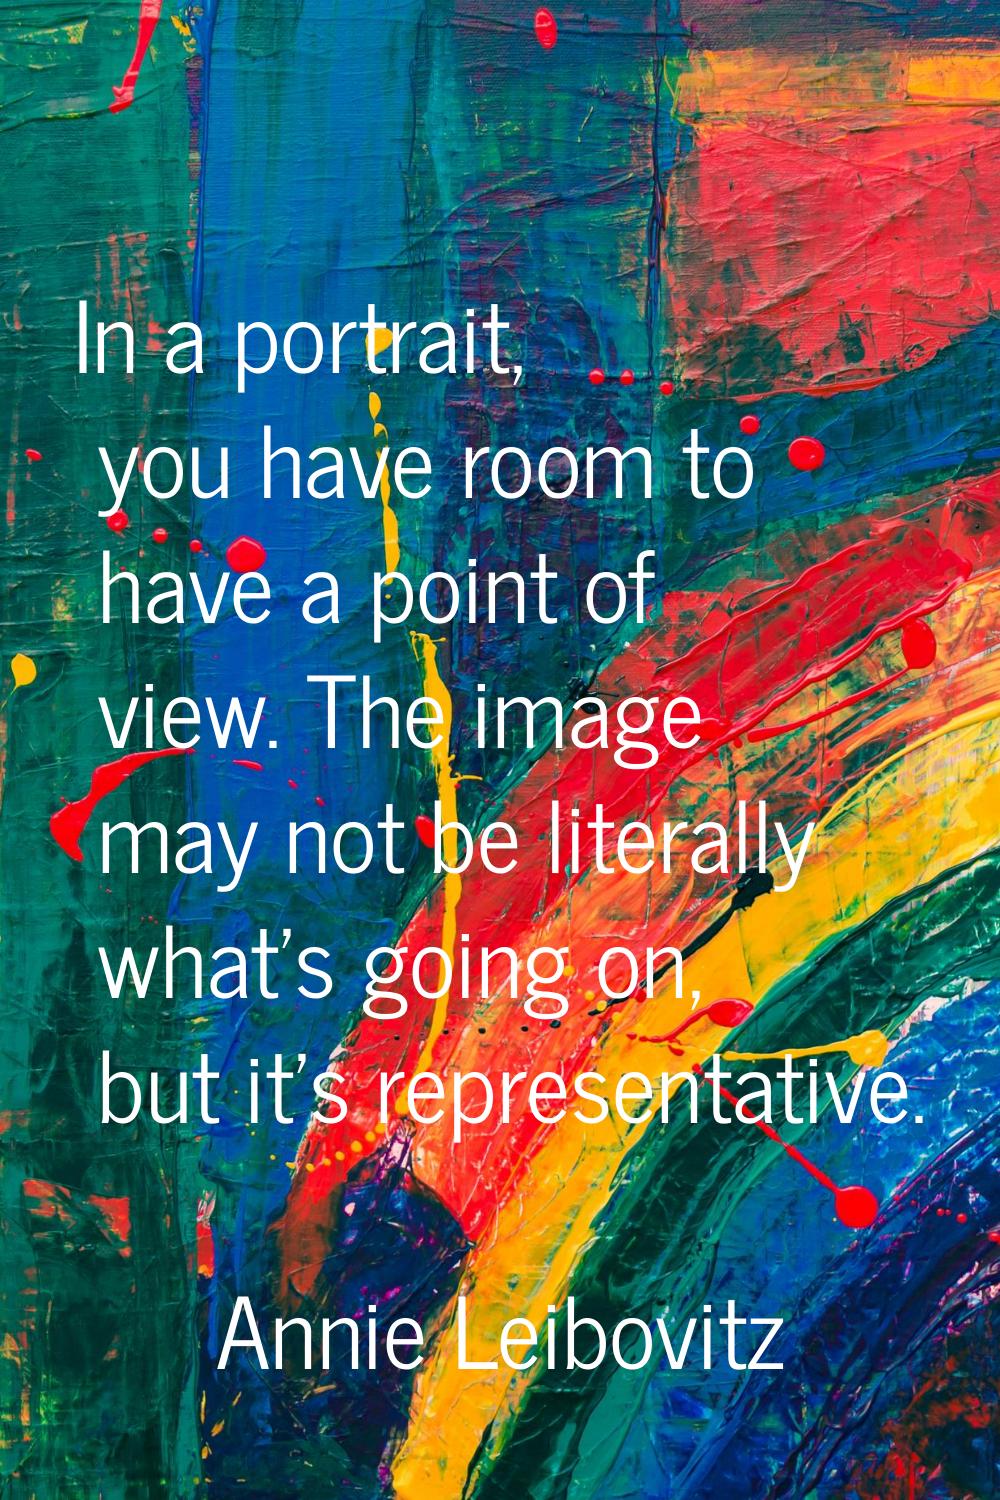 In a portrait, you have room to have a point of view. The image may not be literally what's going o